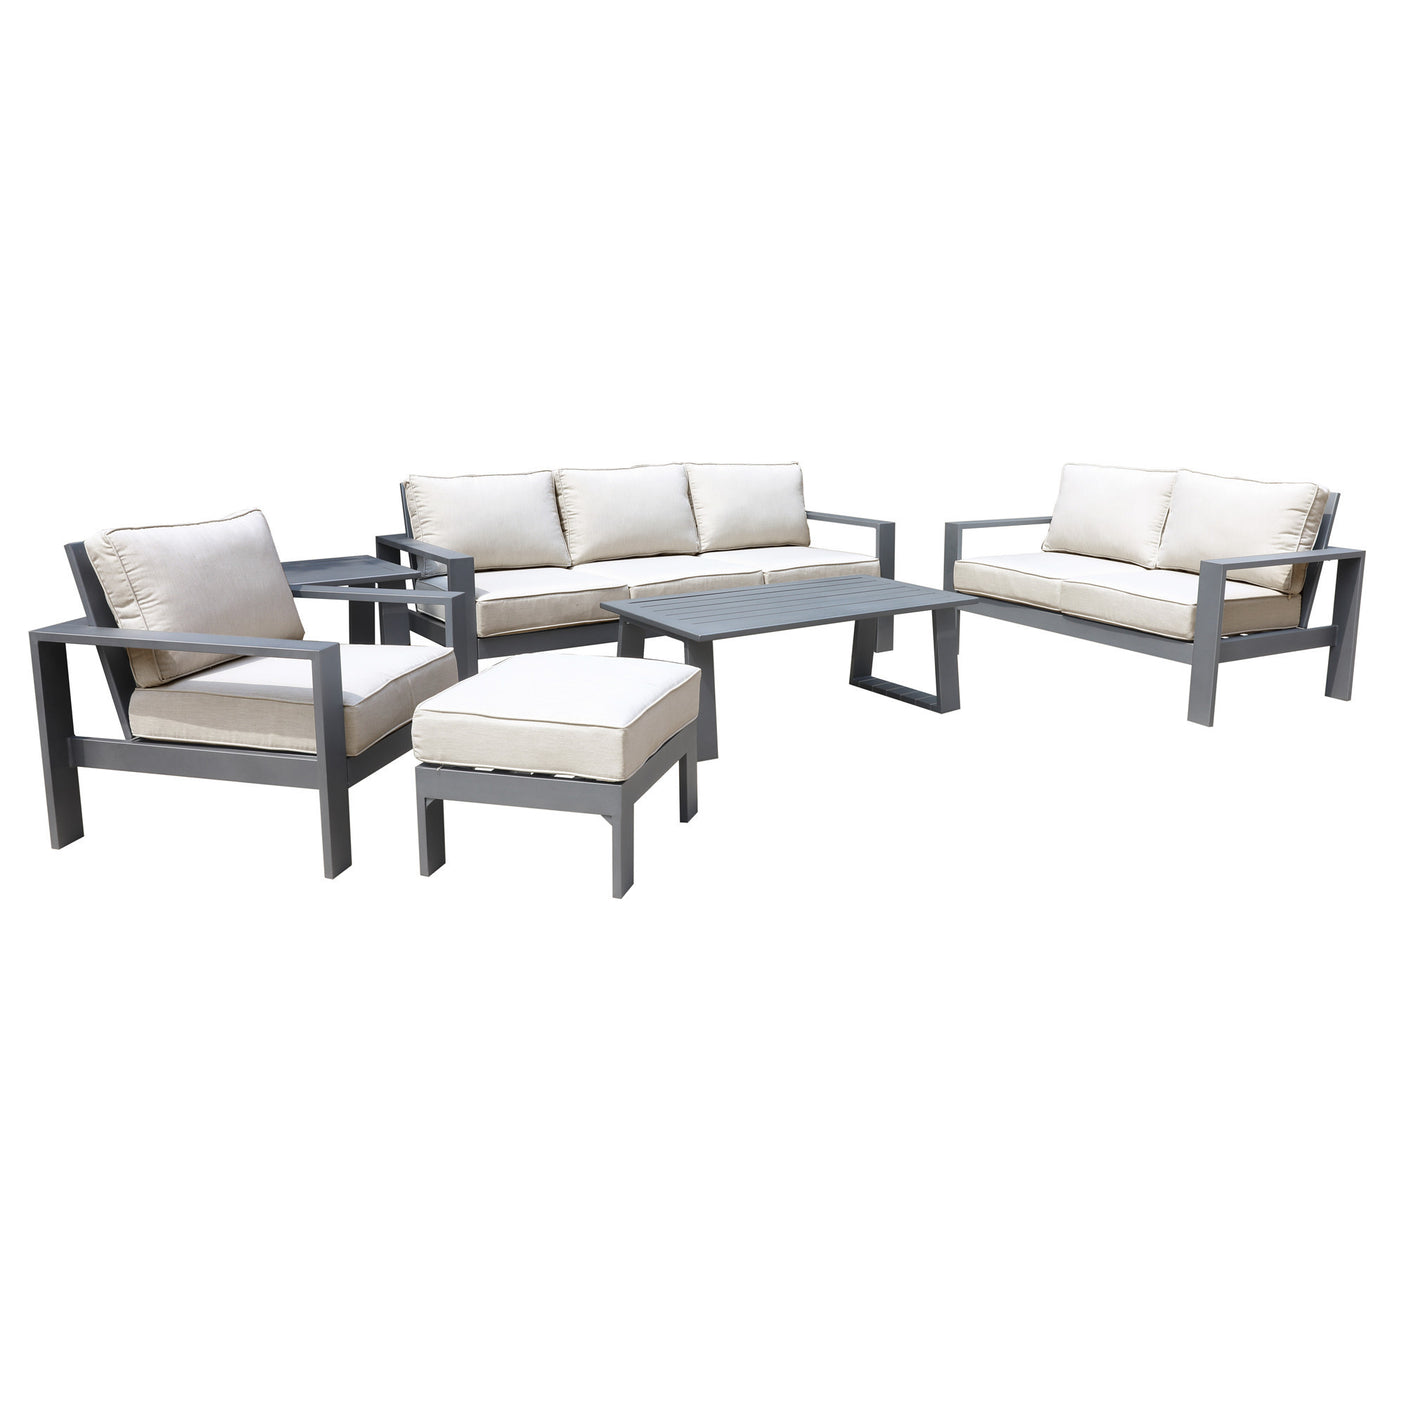 6 Piece Sofa Seating Group with Cushions, Powdered Pewter